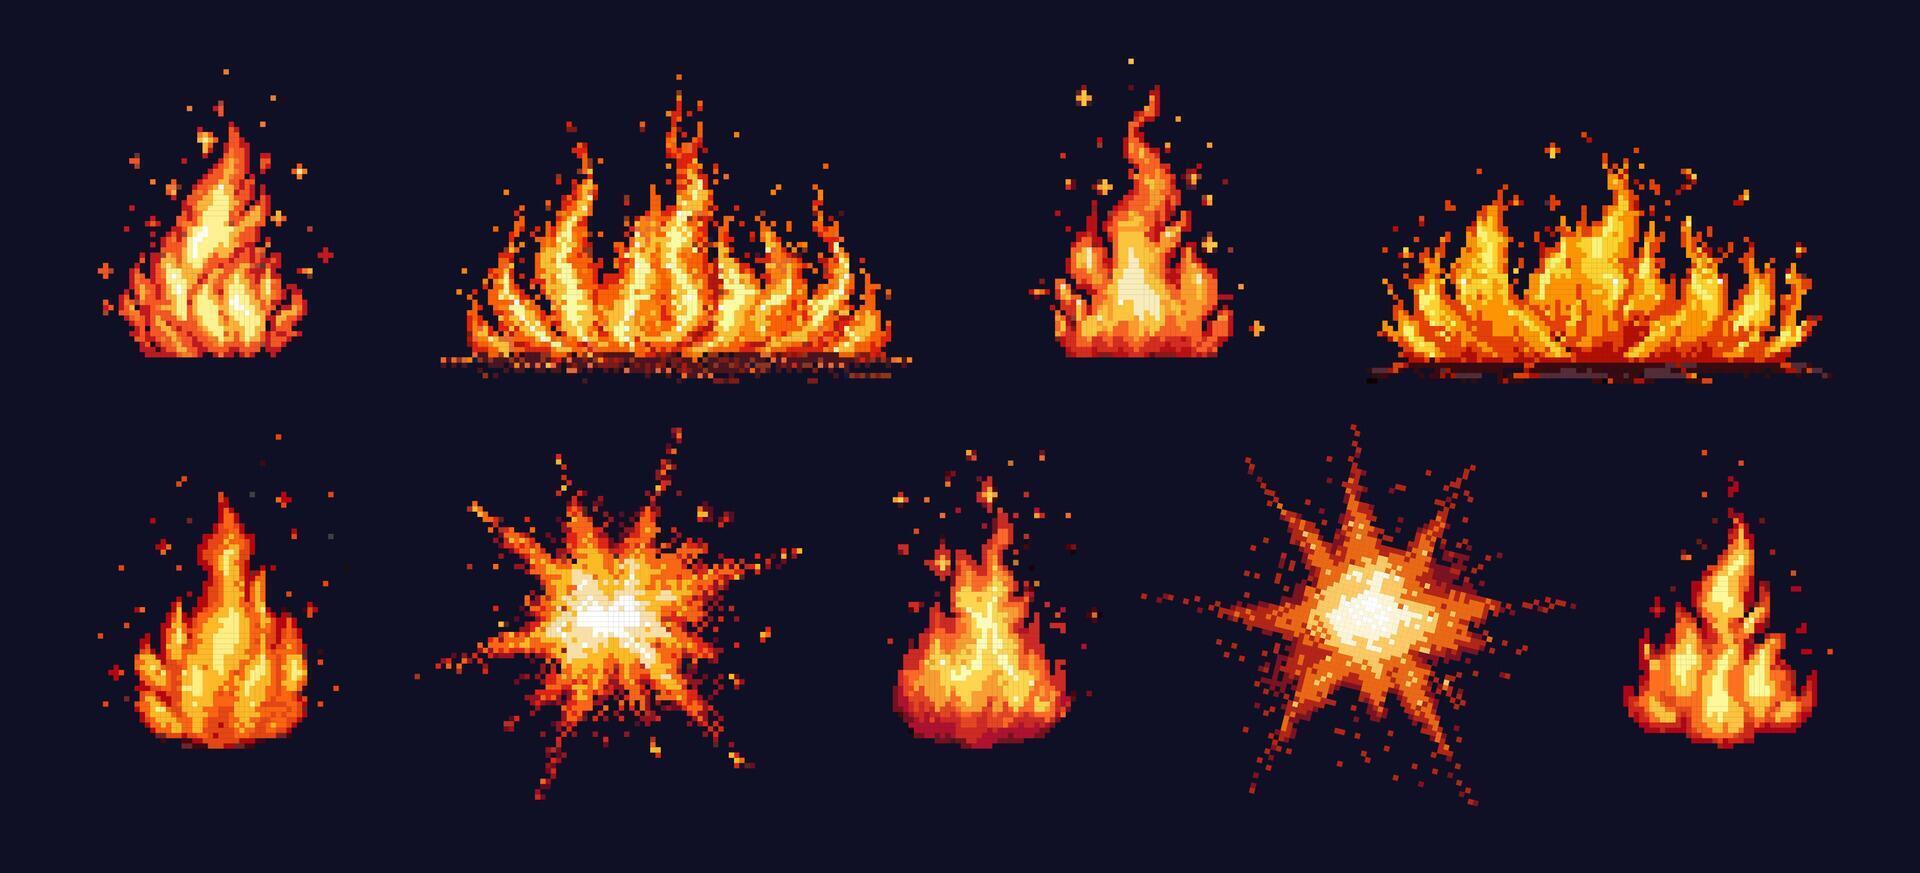 Pixel art fire. Red explosion and bonfire, burning campfire with flame, ignitions and sparks on dark night background. 8 bit pixel 80s game isolated set vector